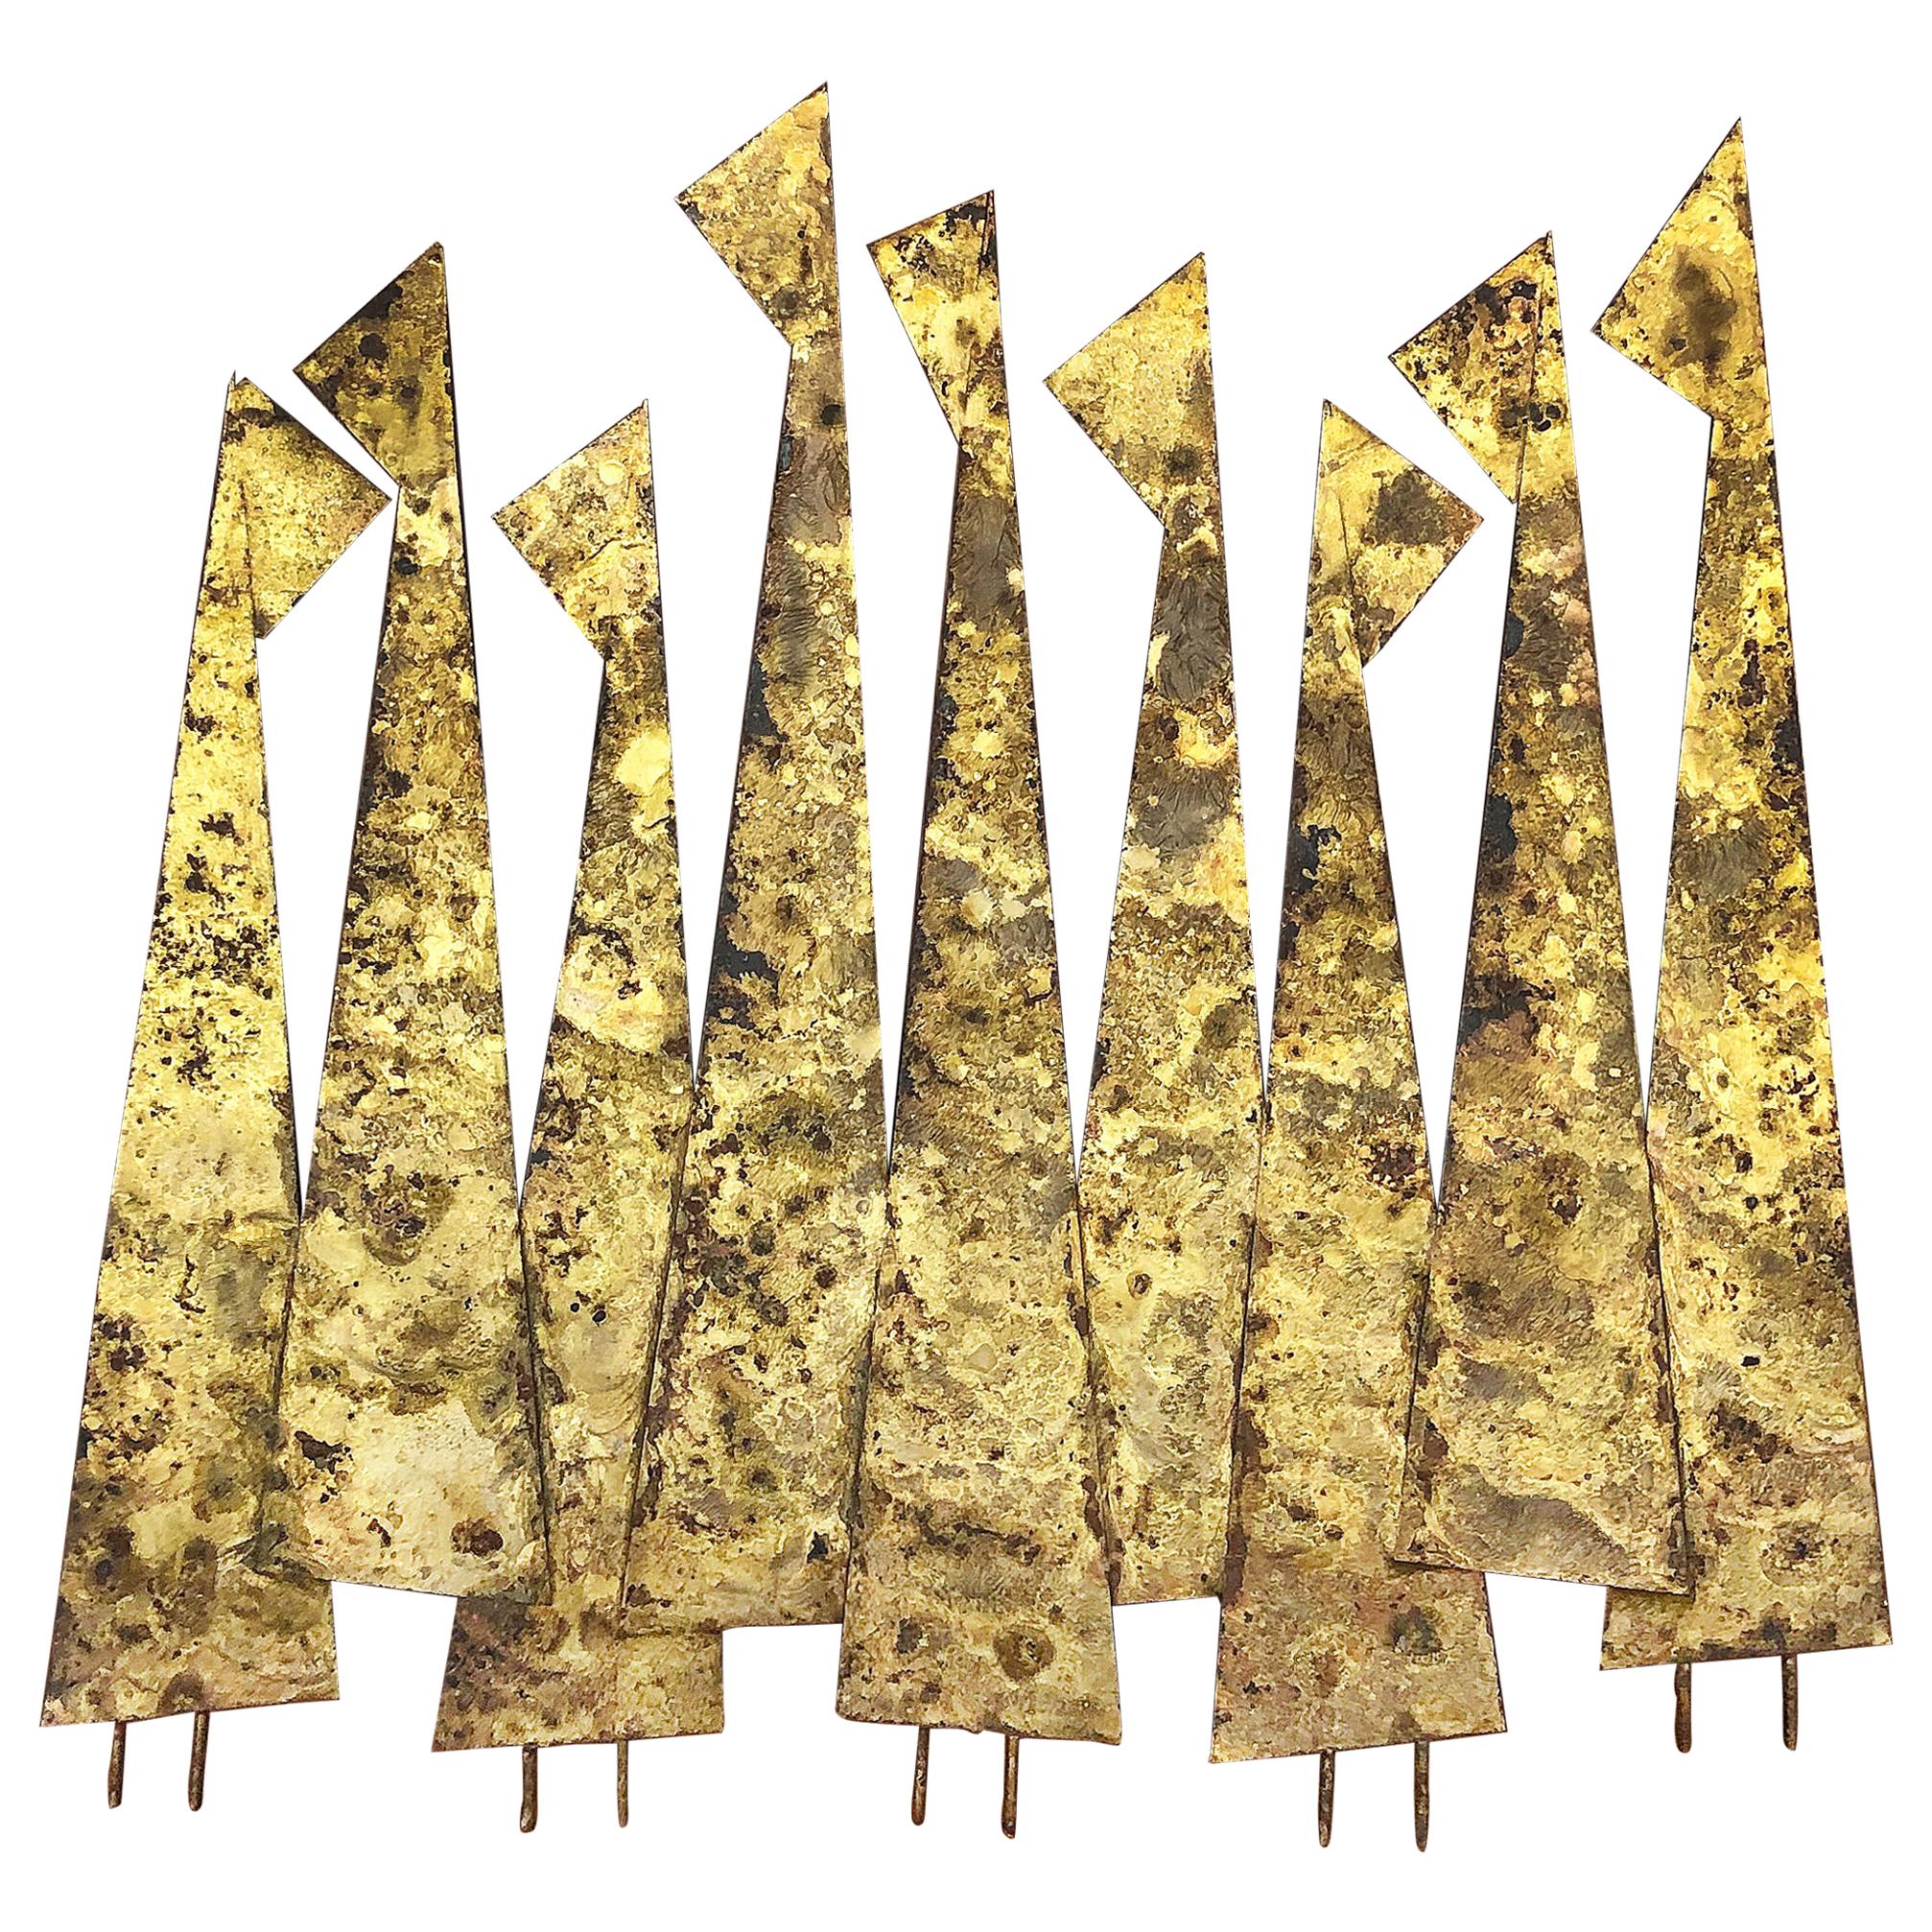 Abstract Peter Pepper Brutalist metal wall sculpture


Offered for sale is an abstract Mid-Century Modern metal Brutalist wall sculpture by Peter Pepper Products of Wilmington, California. The circa 1960s wall sculpture is mounted on walnut with